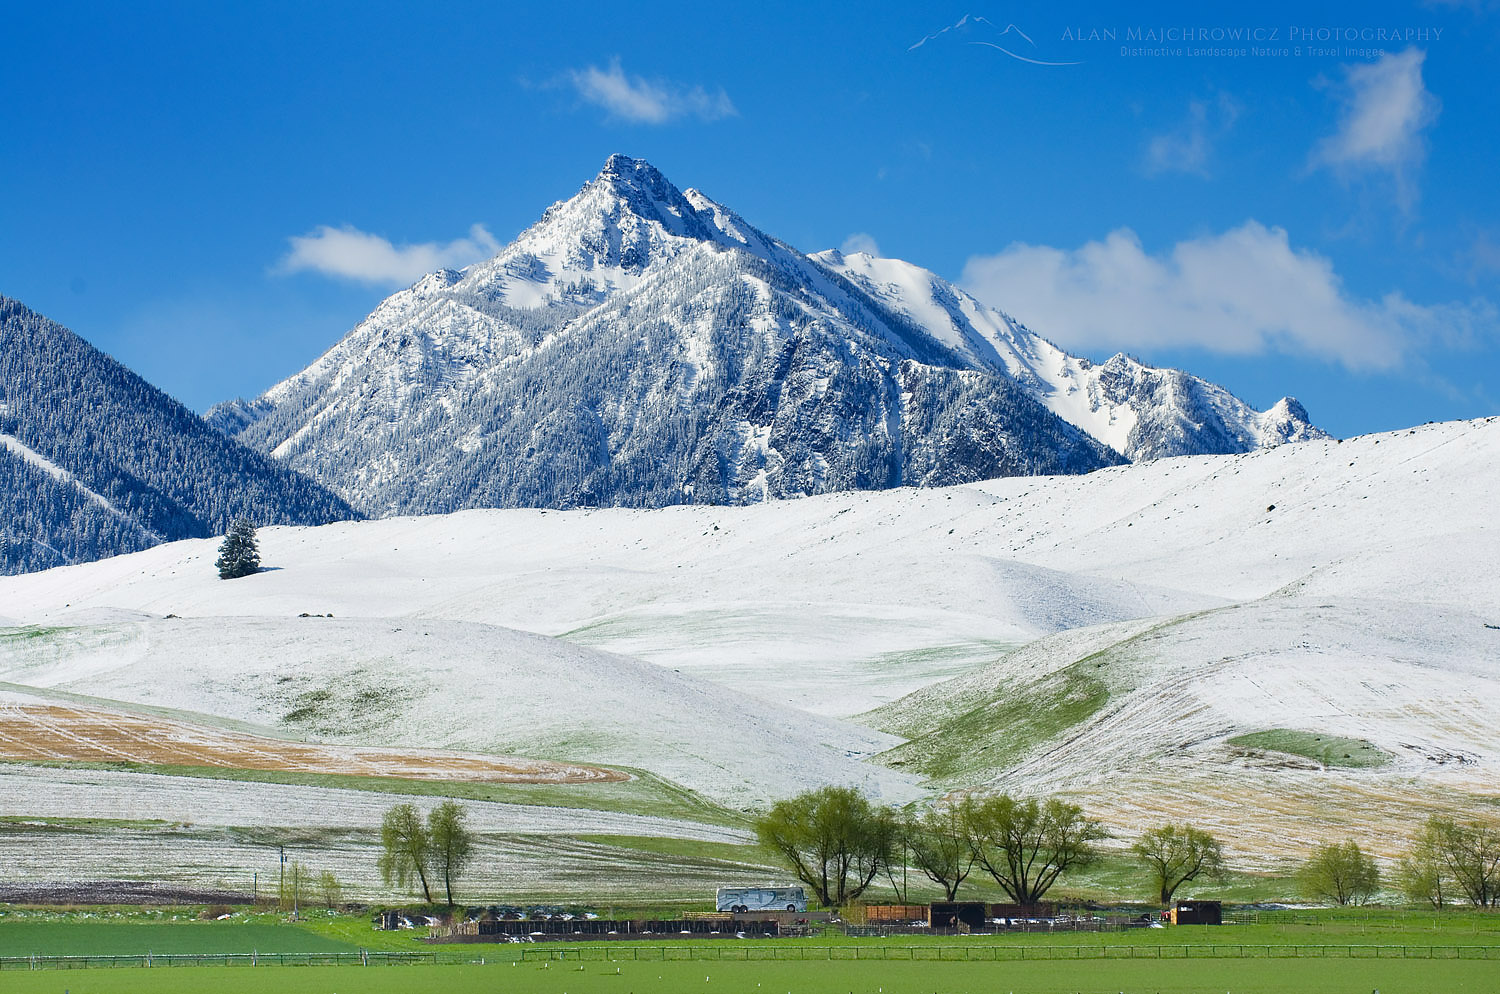 Spring snowfall in the Wallowa Valley of Northeast Oregon #44854